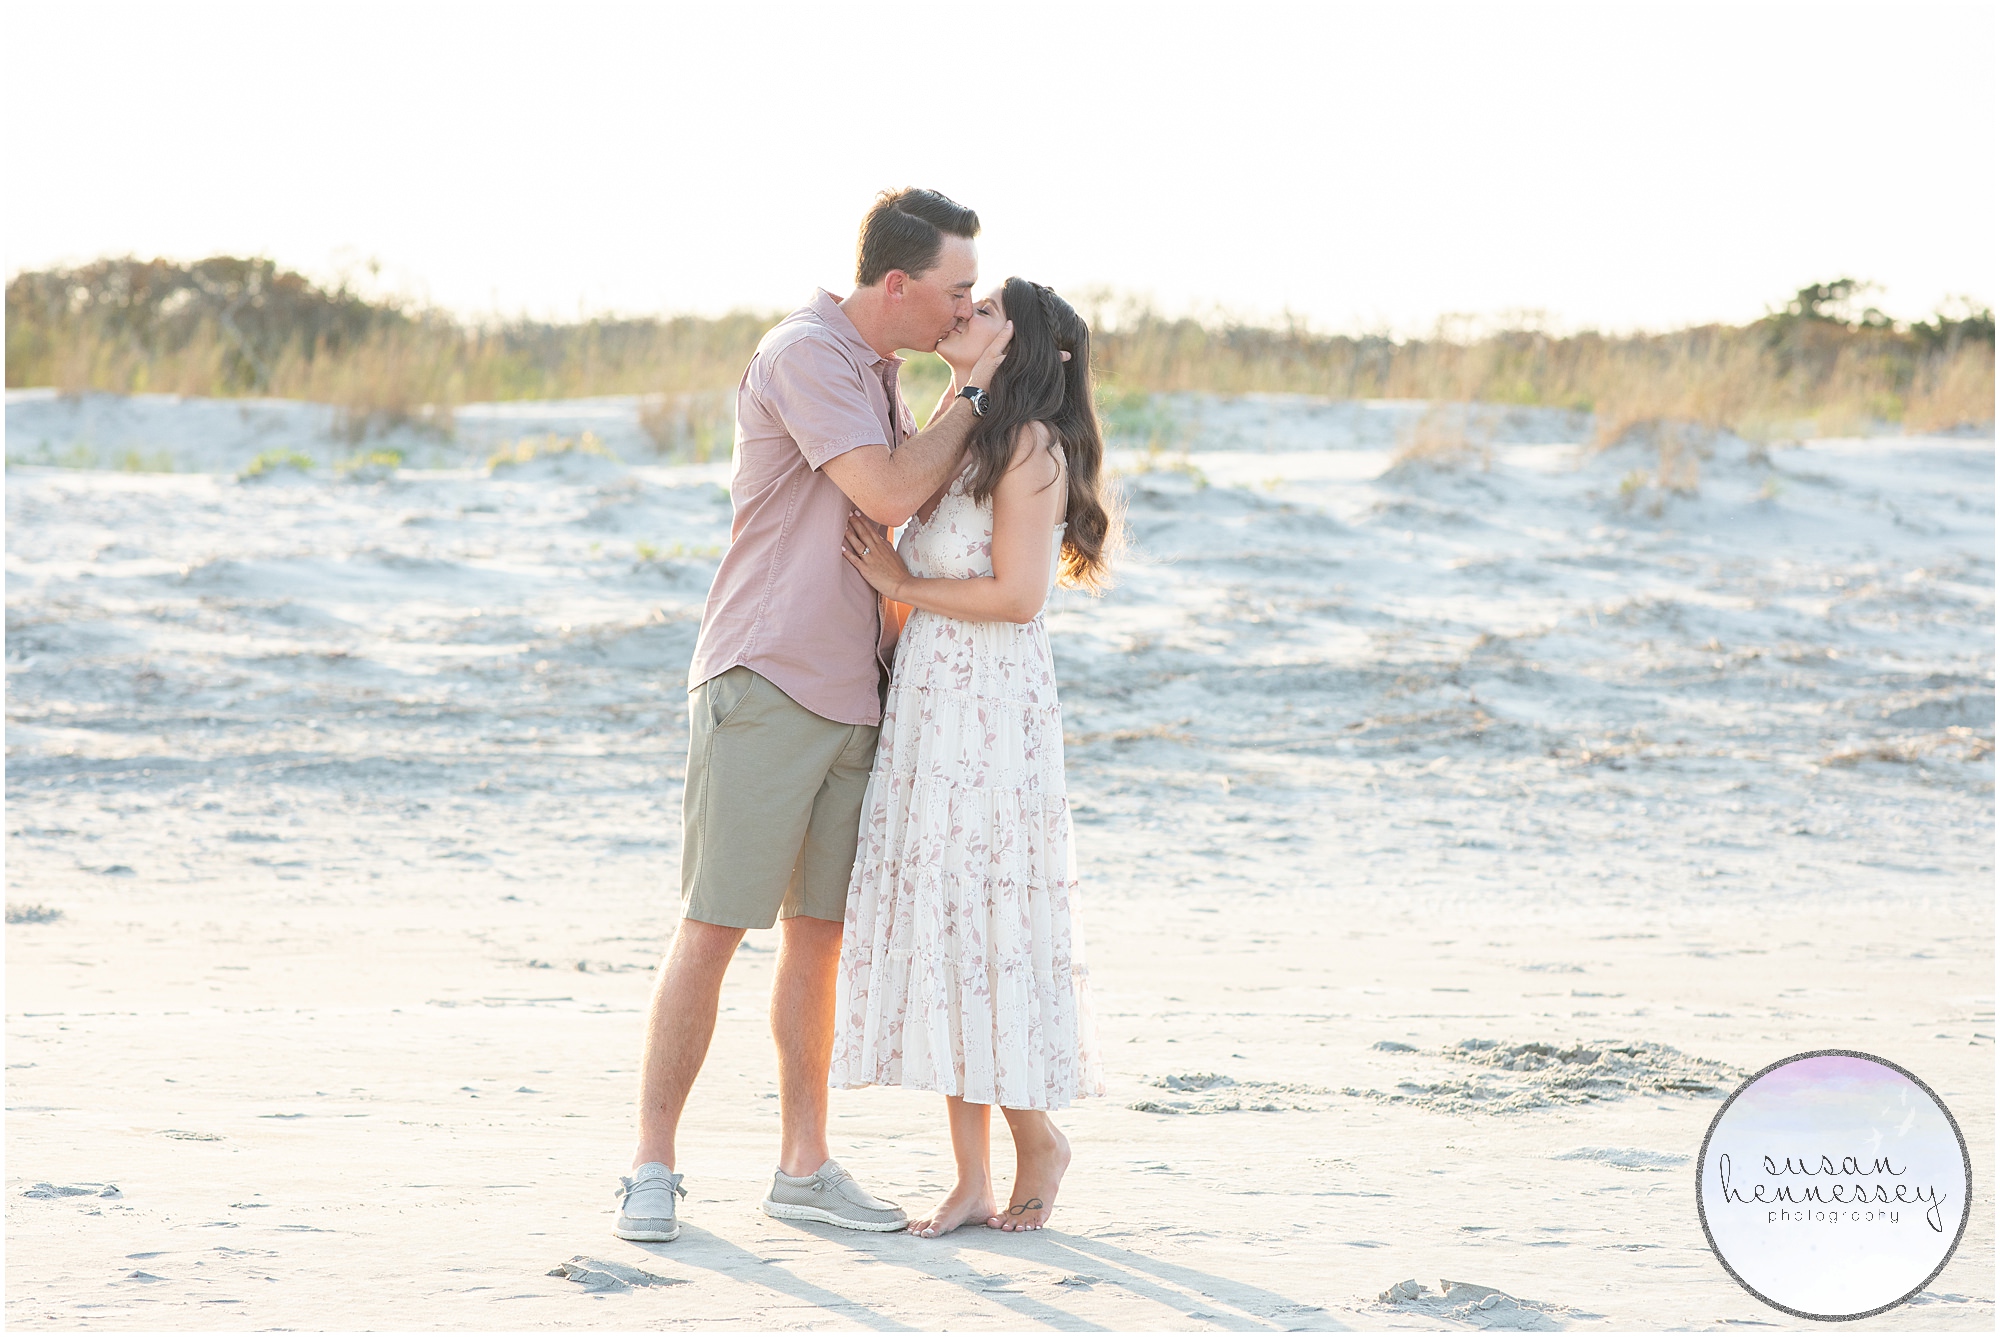 A romantic summer session at Corson's Inlet